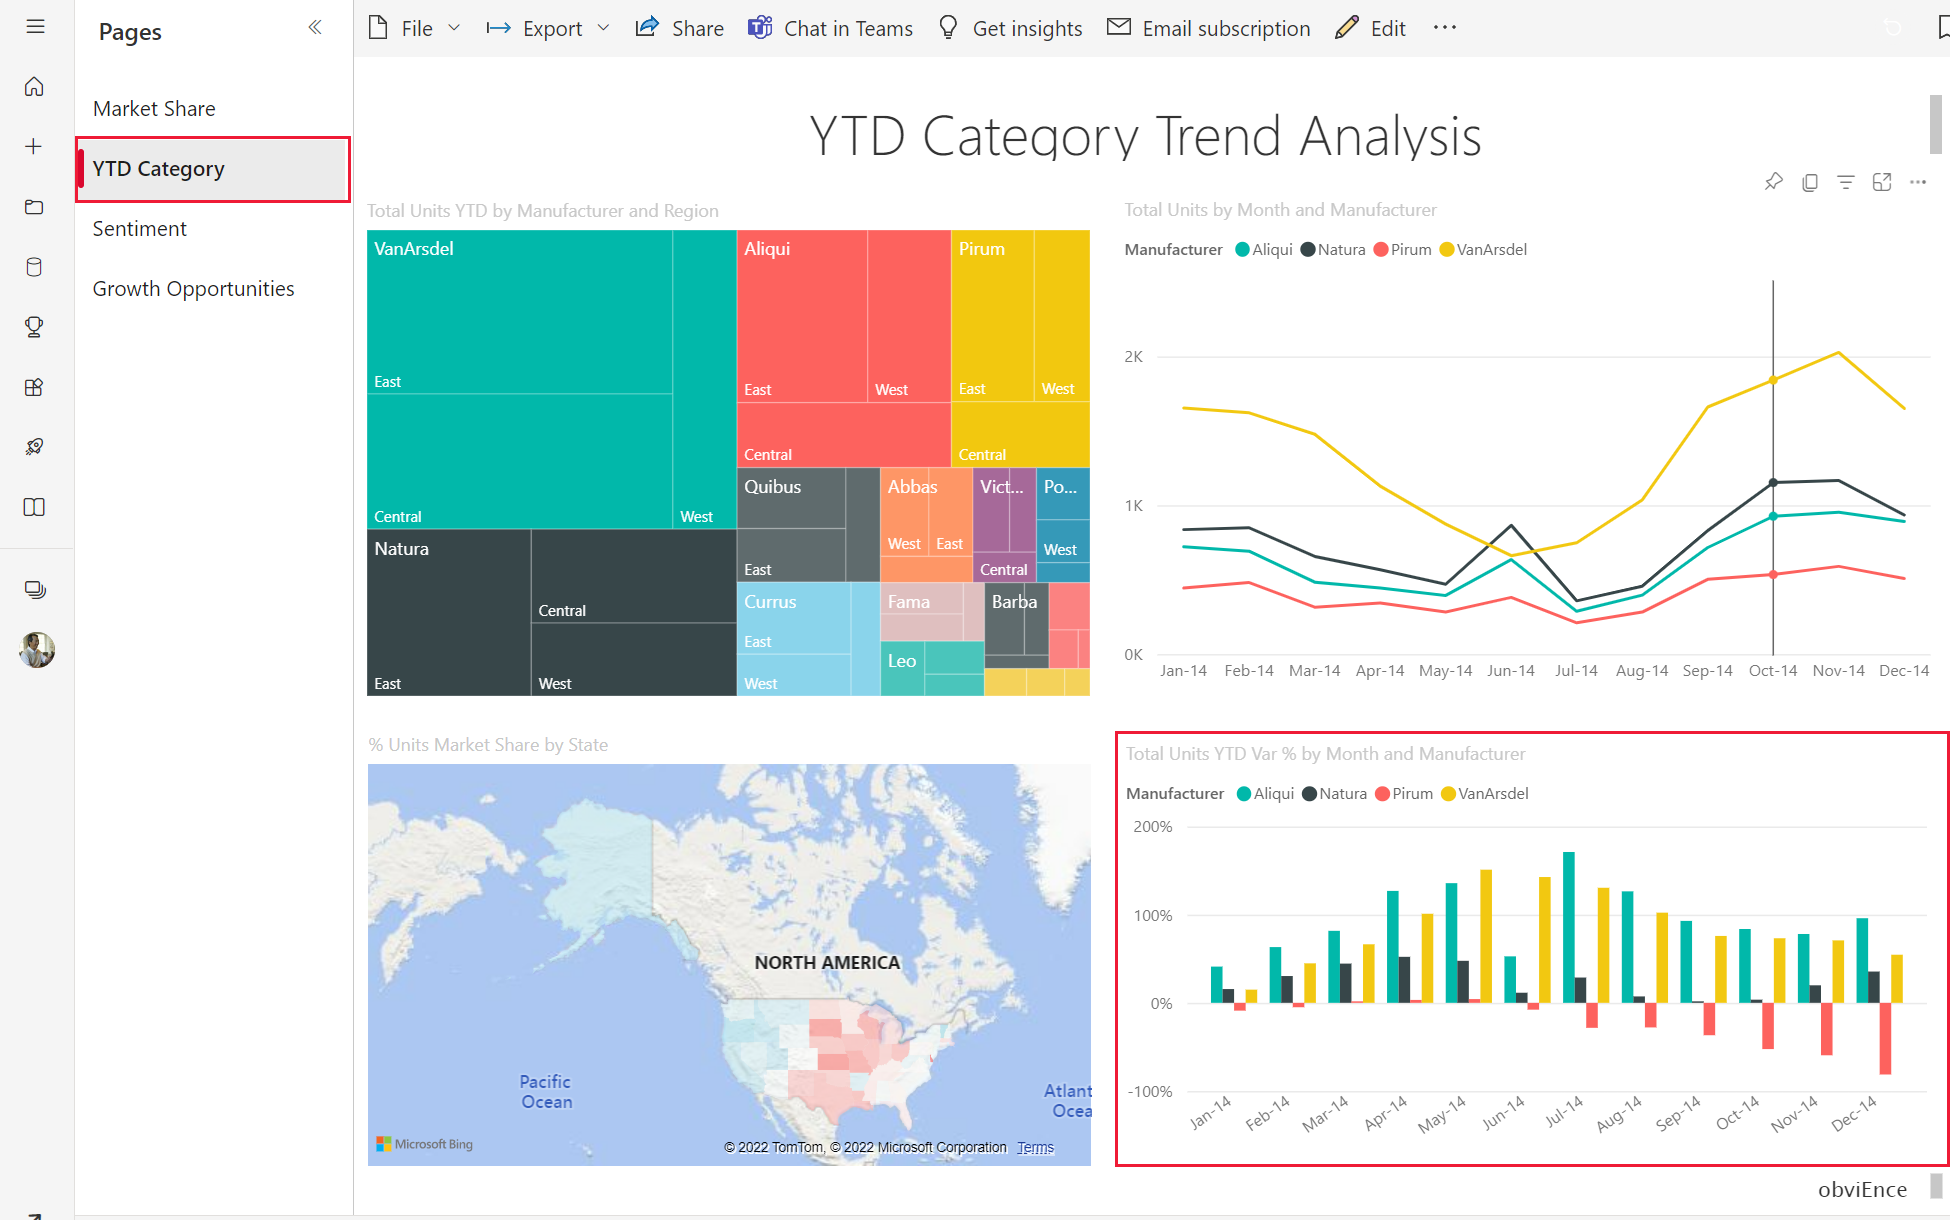 Screenshot showing the YTD Category Trend Analysis page.